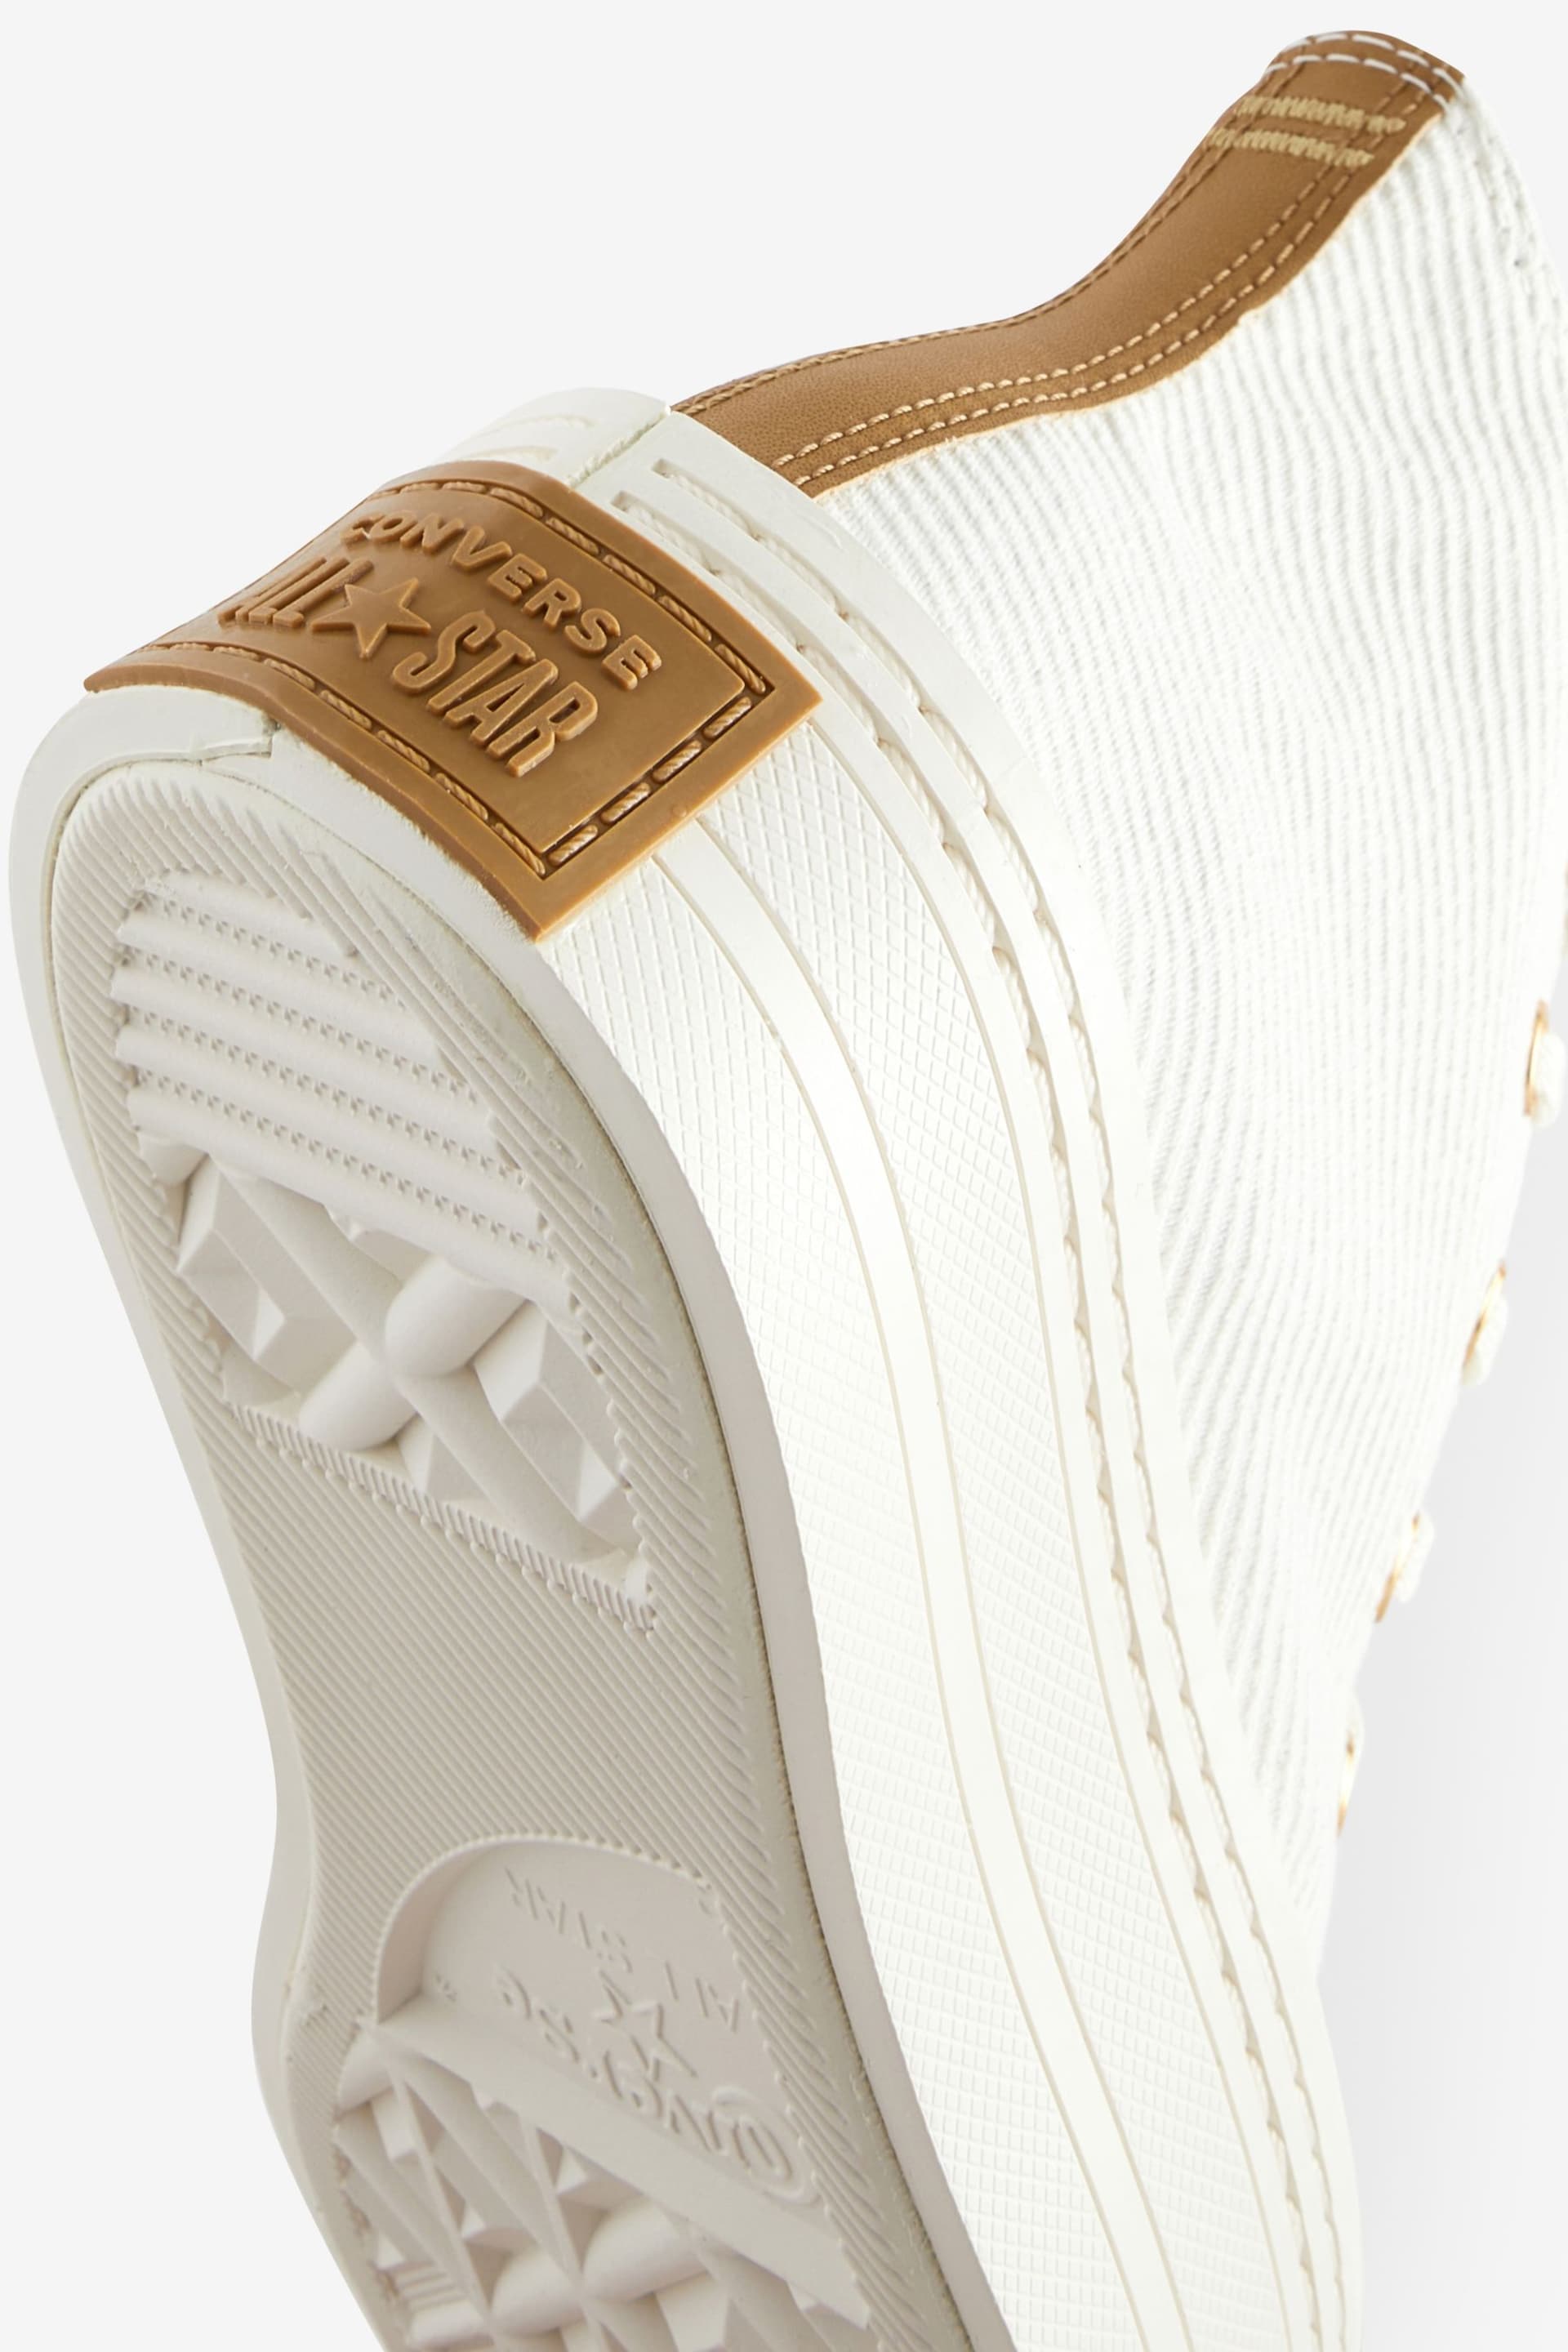 Converse Neutral Modern Lift Trainers - Image 8 of 9